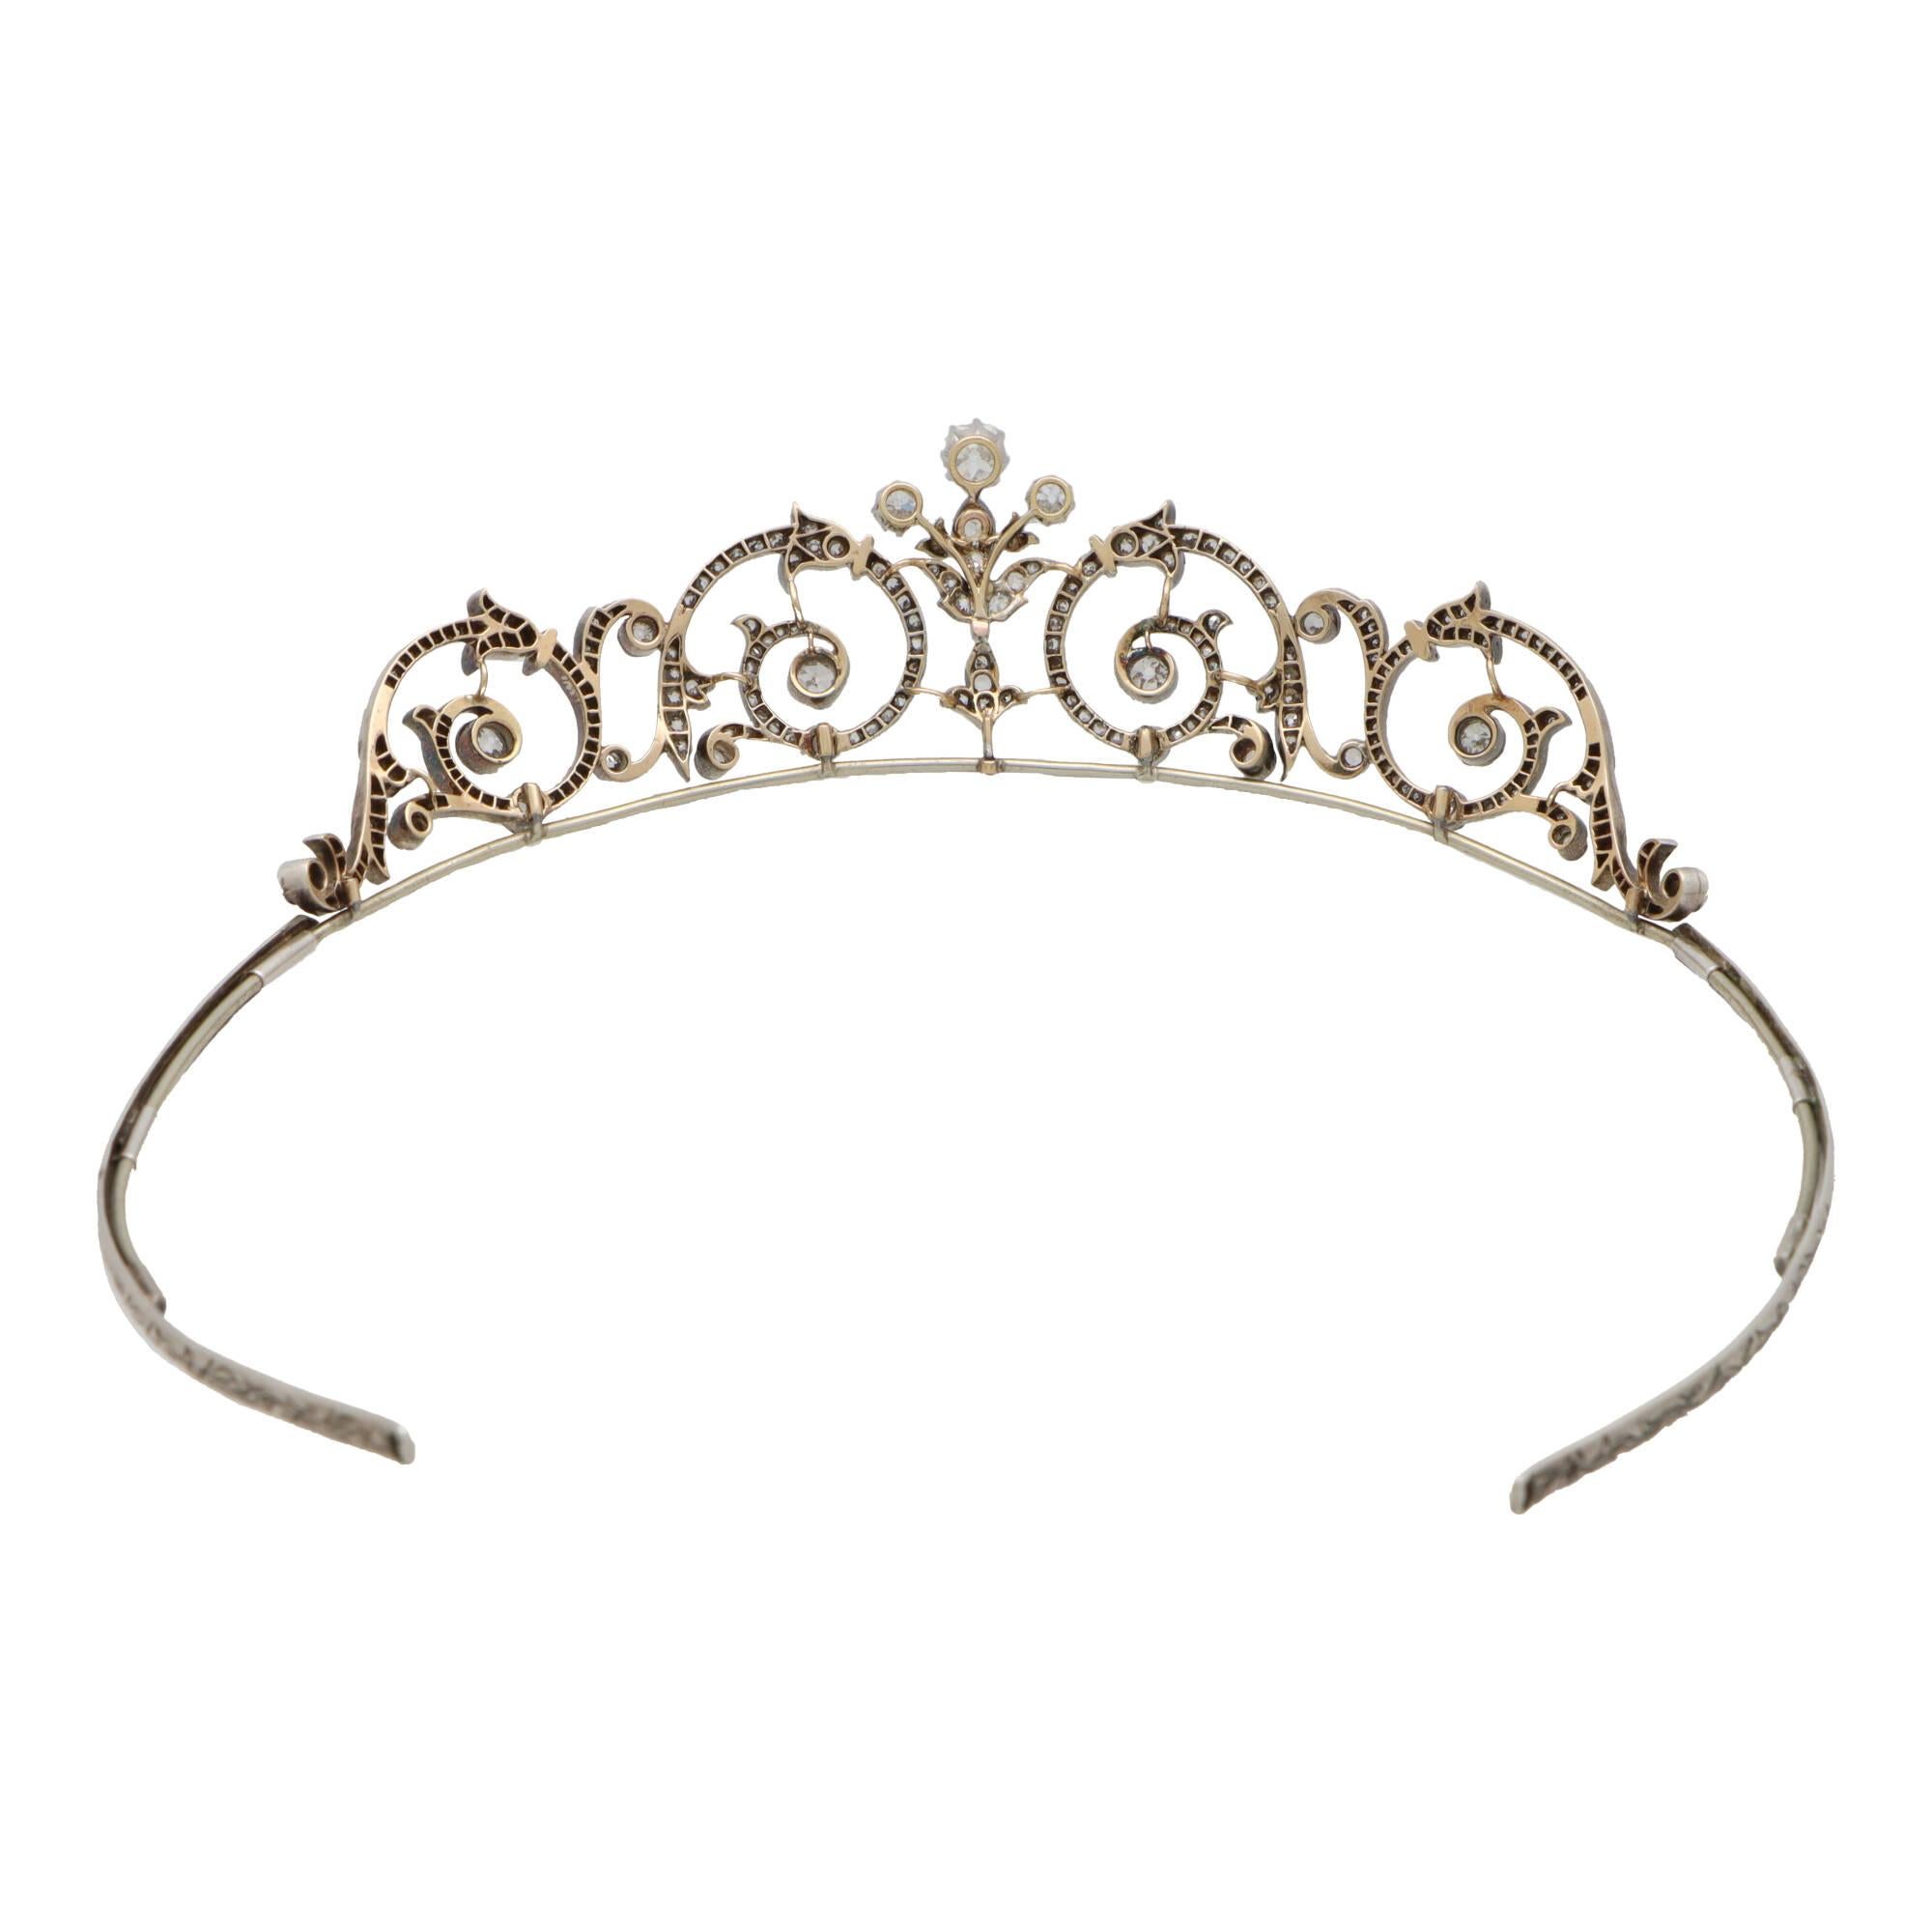  A truly elegant Edwardian old cut diamond tiara set in silver and gold, circa 1910.

This beautifully handcrafted tiara is composed of a number of elegant foliate scroll motifs, commonly seen within the Victorian and Edwardian jewellery eras. The